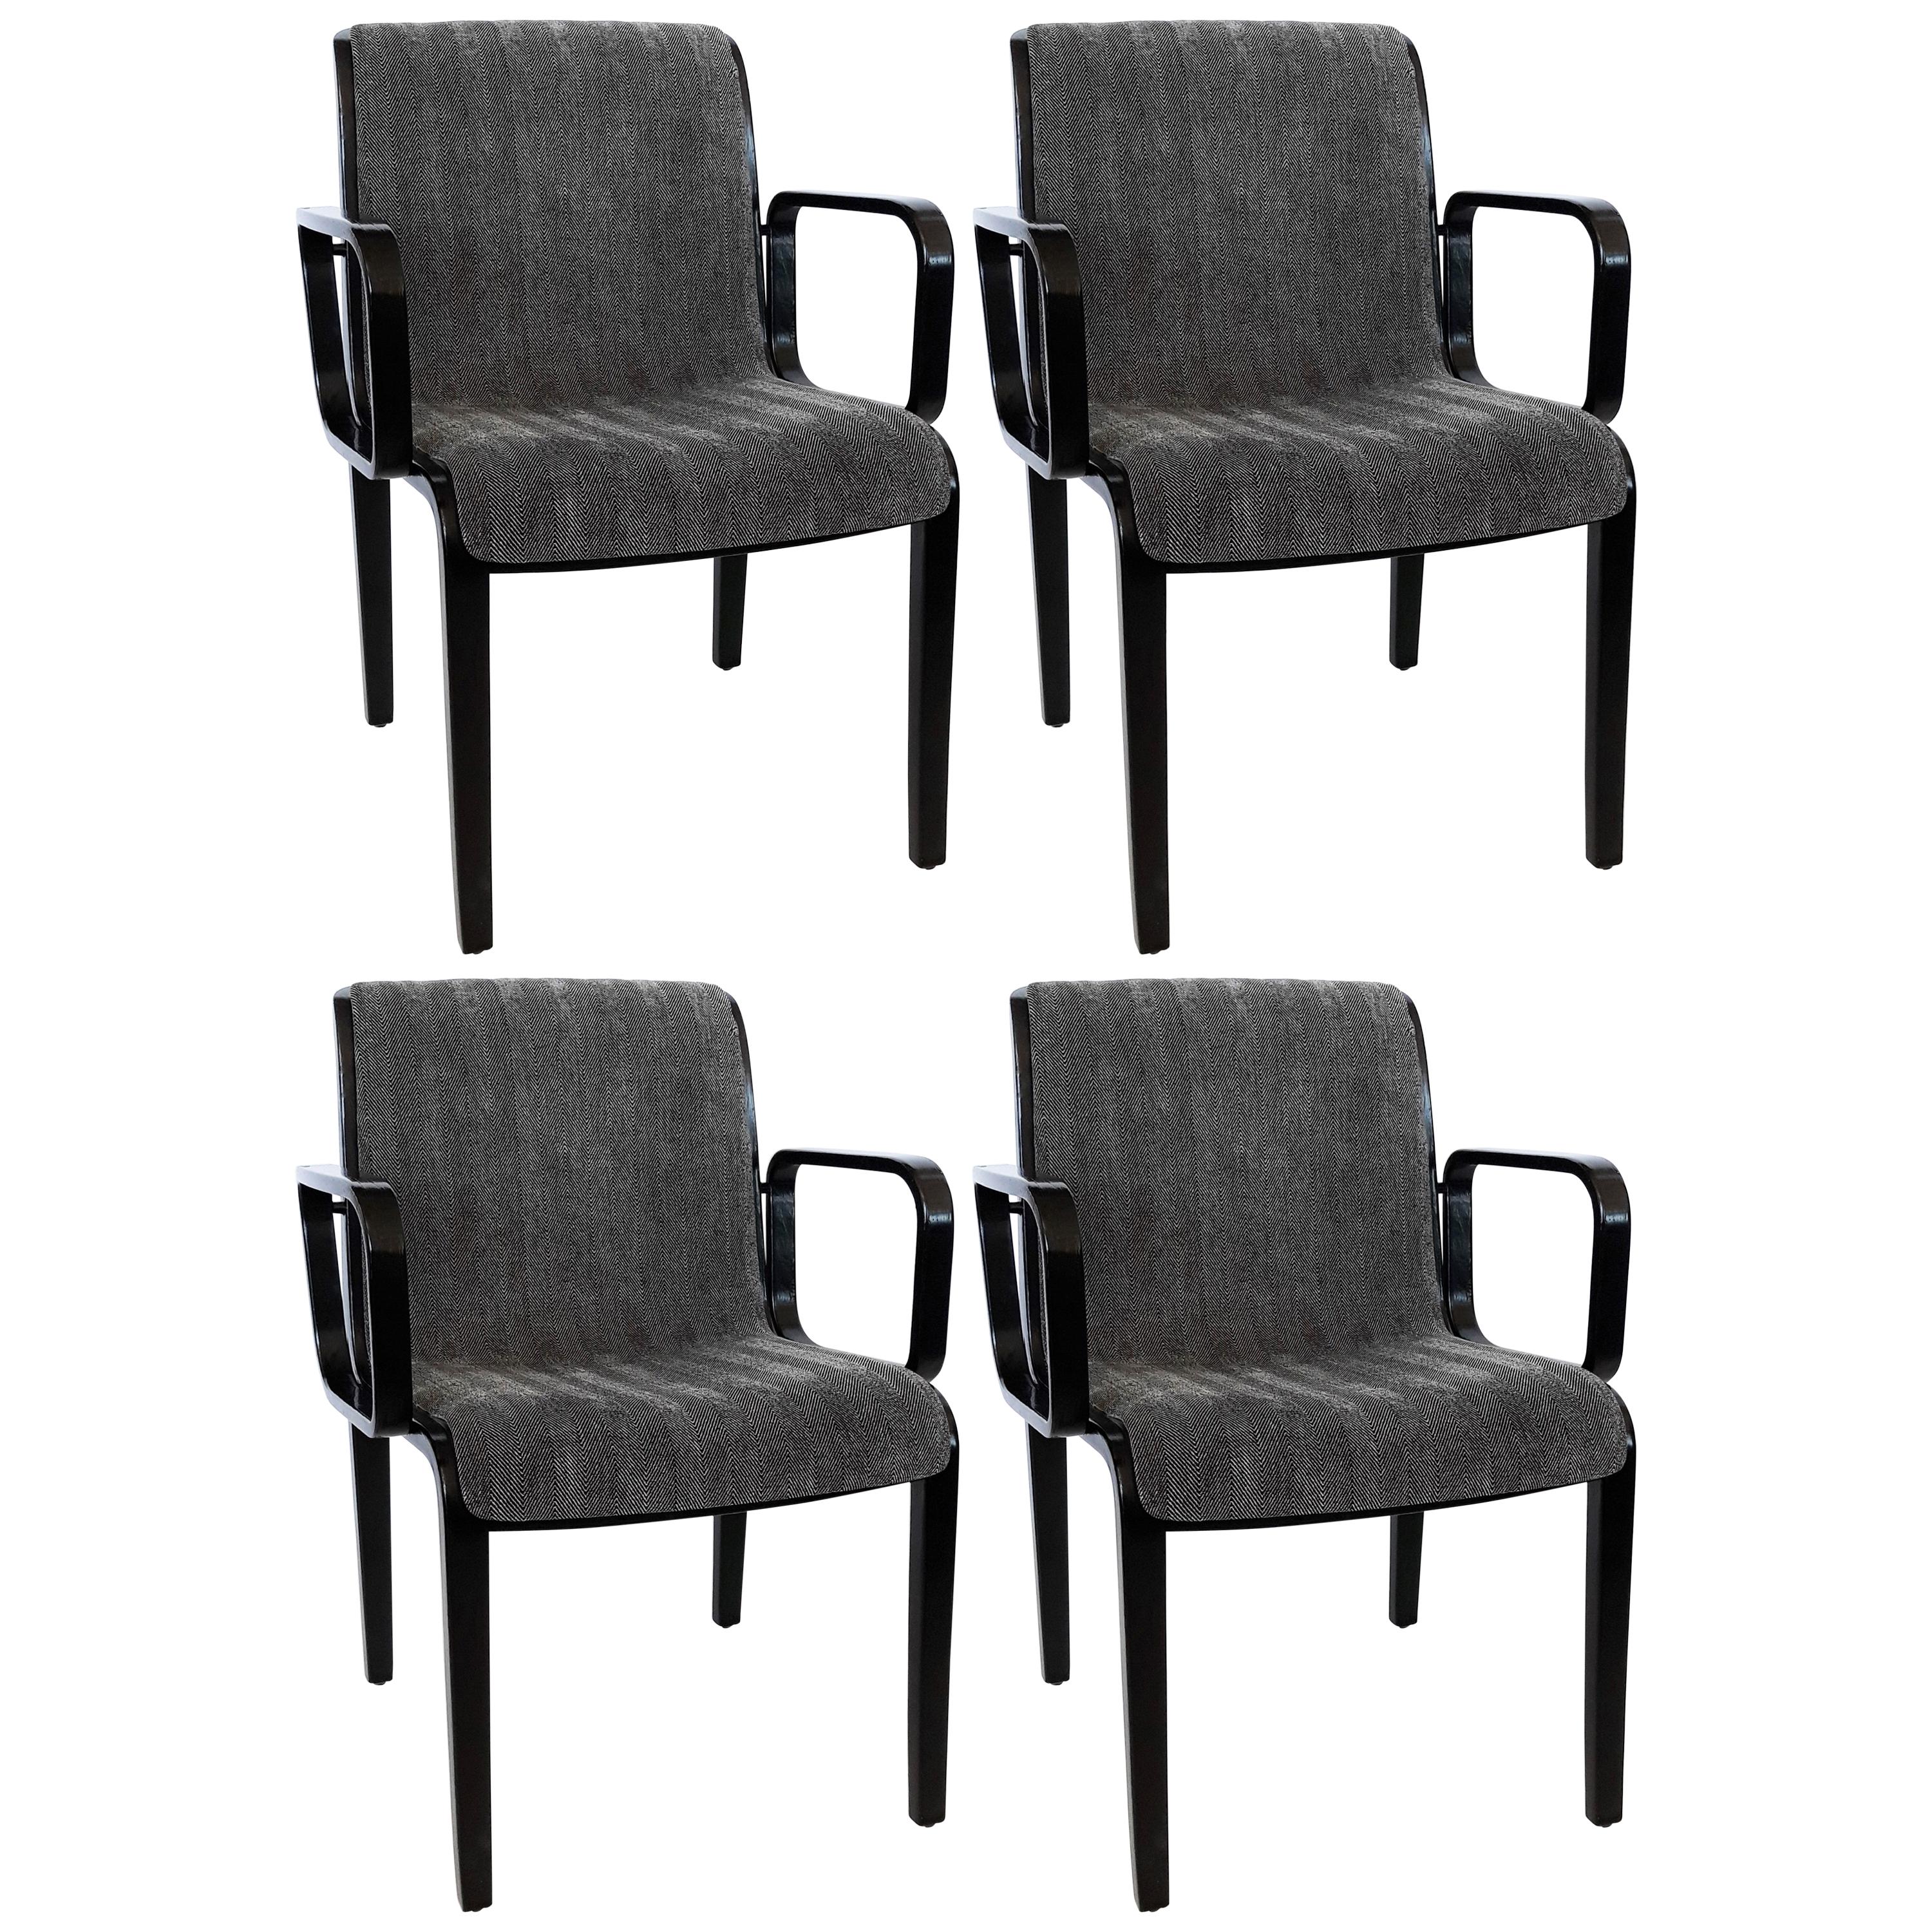 Four Bill Stephens For Knoll Black Lacquered Armchairs For Sale